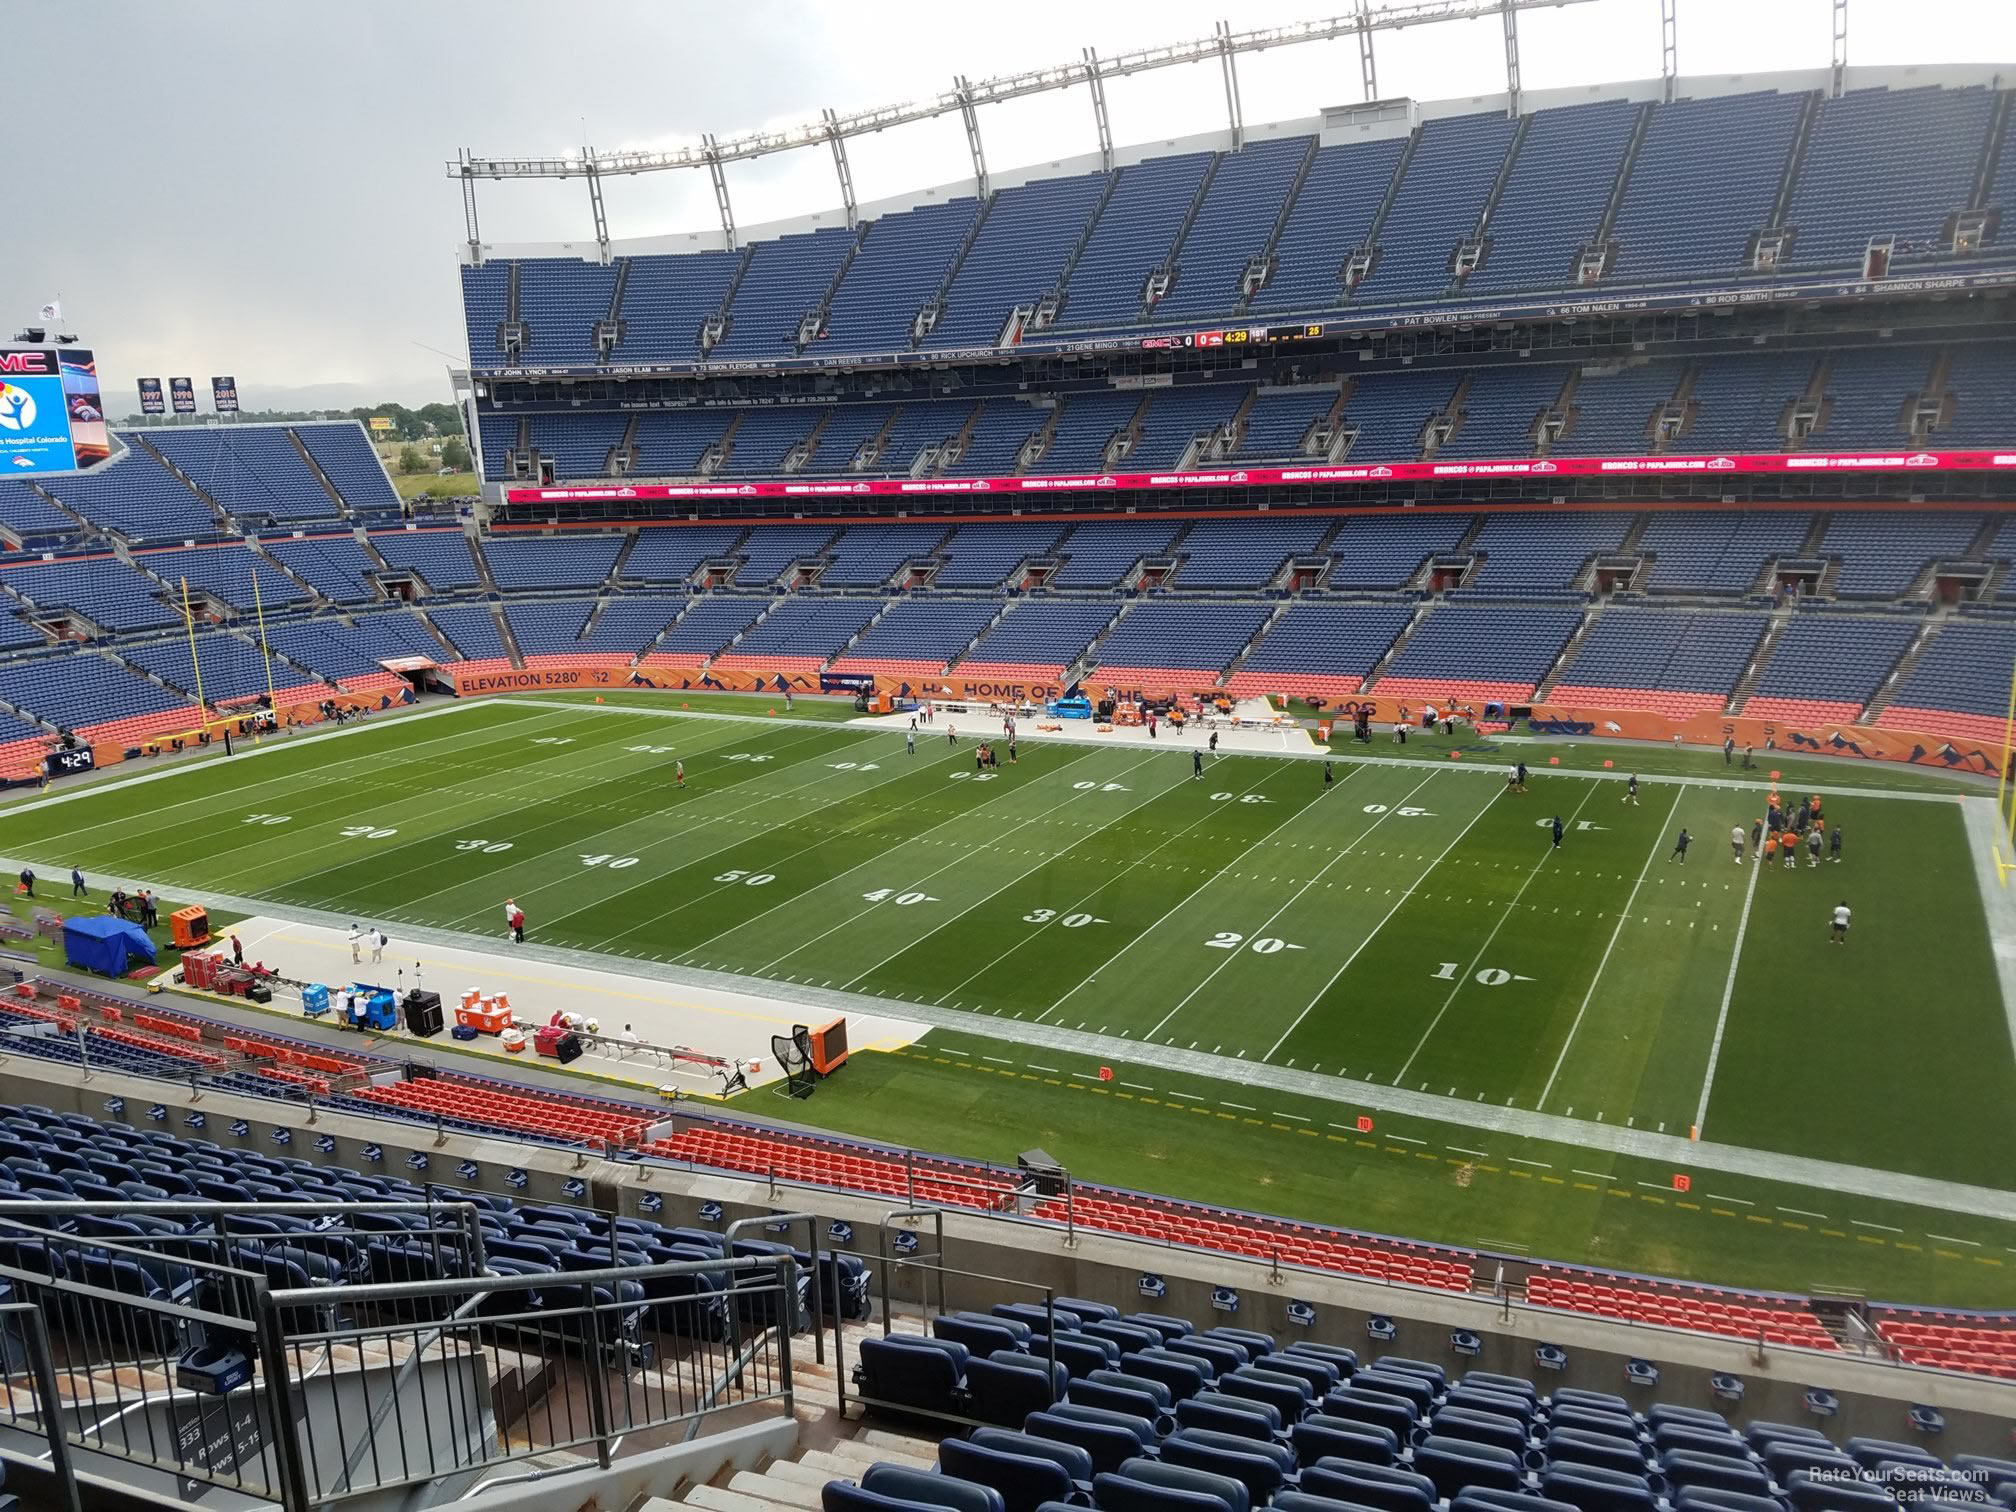 section 332, row 12 seat view  - empower field (at mile high)